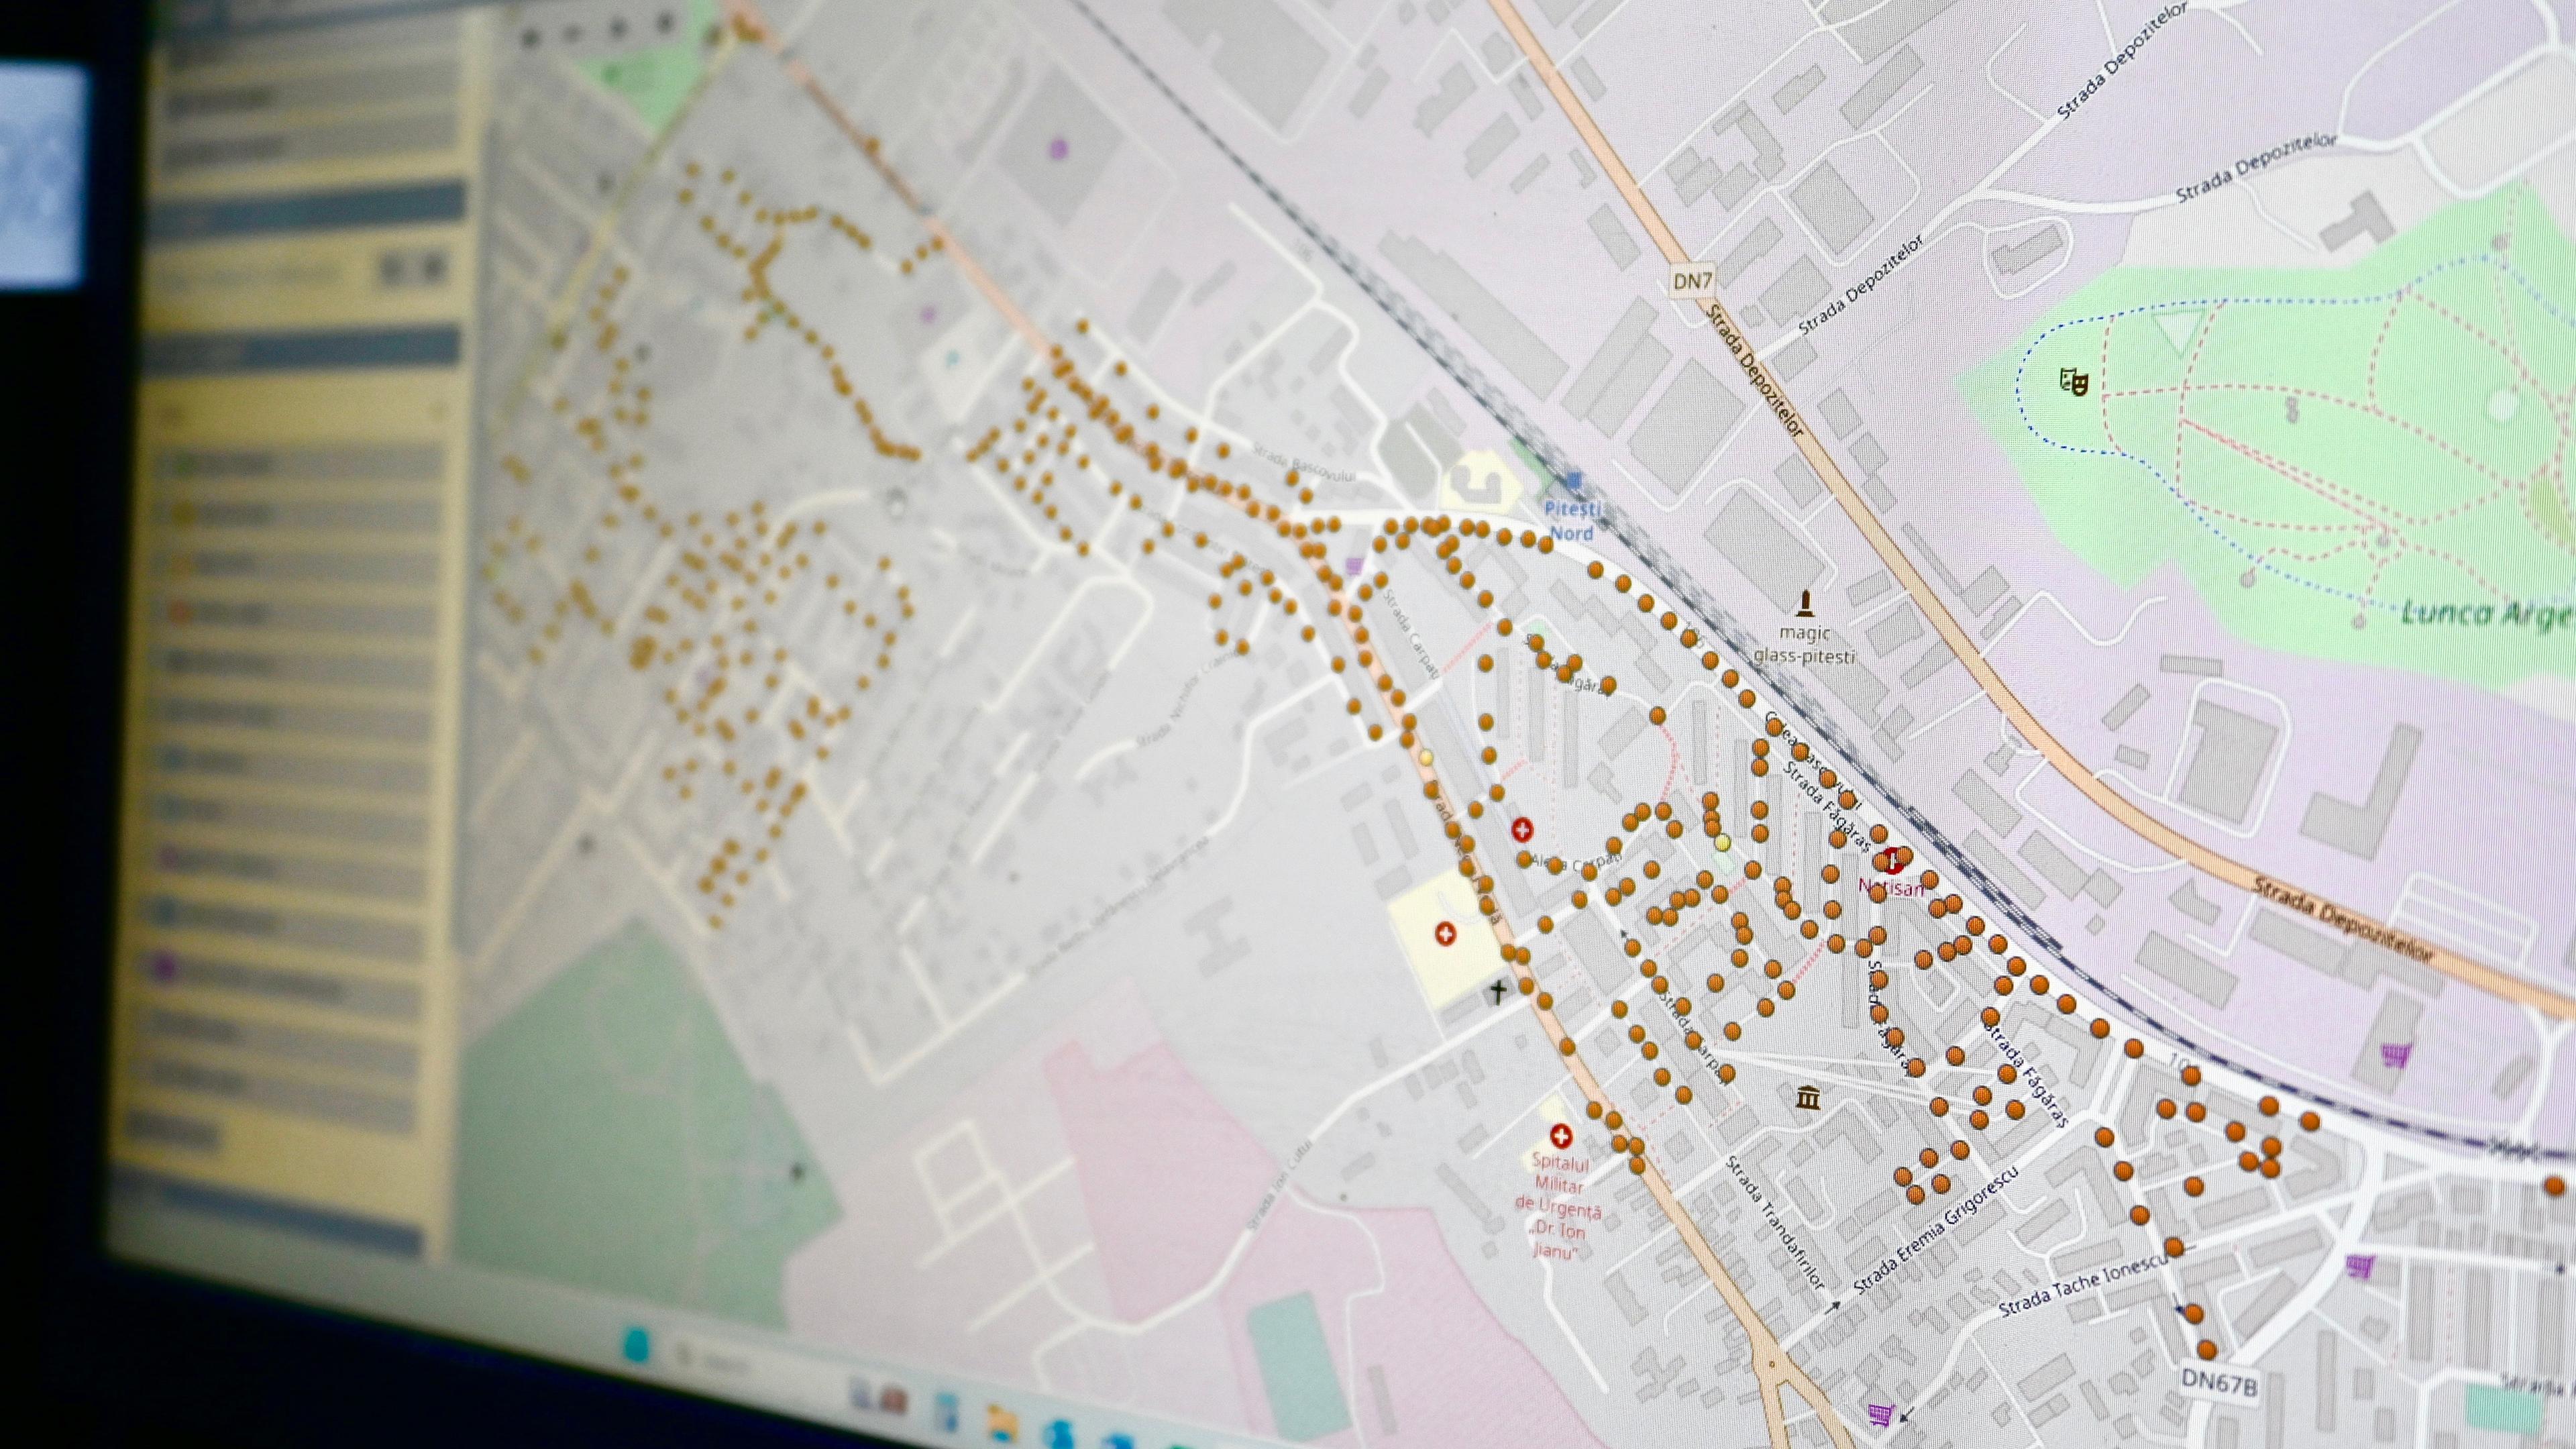 A map controlling the different street lights. A part of the project is the possibility to monitor street lightening